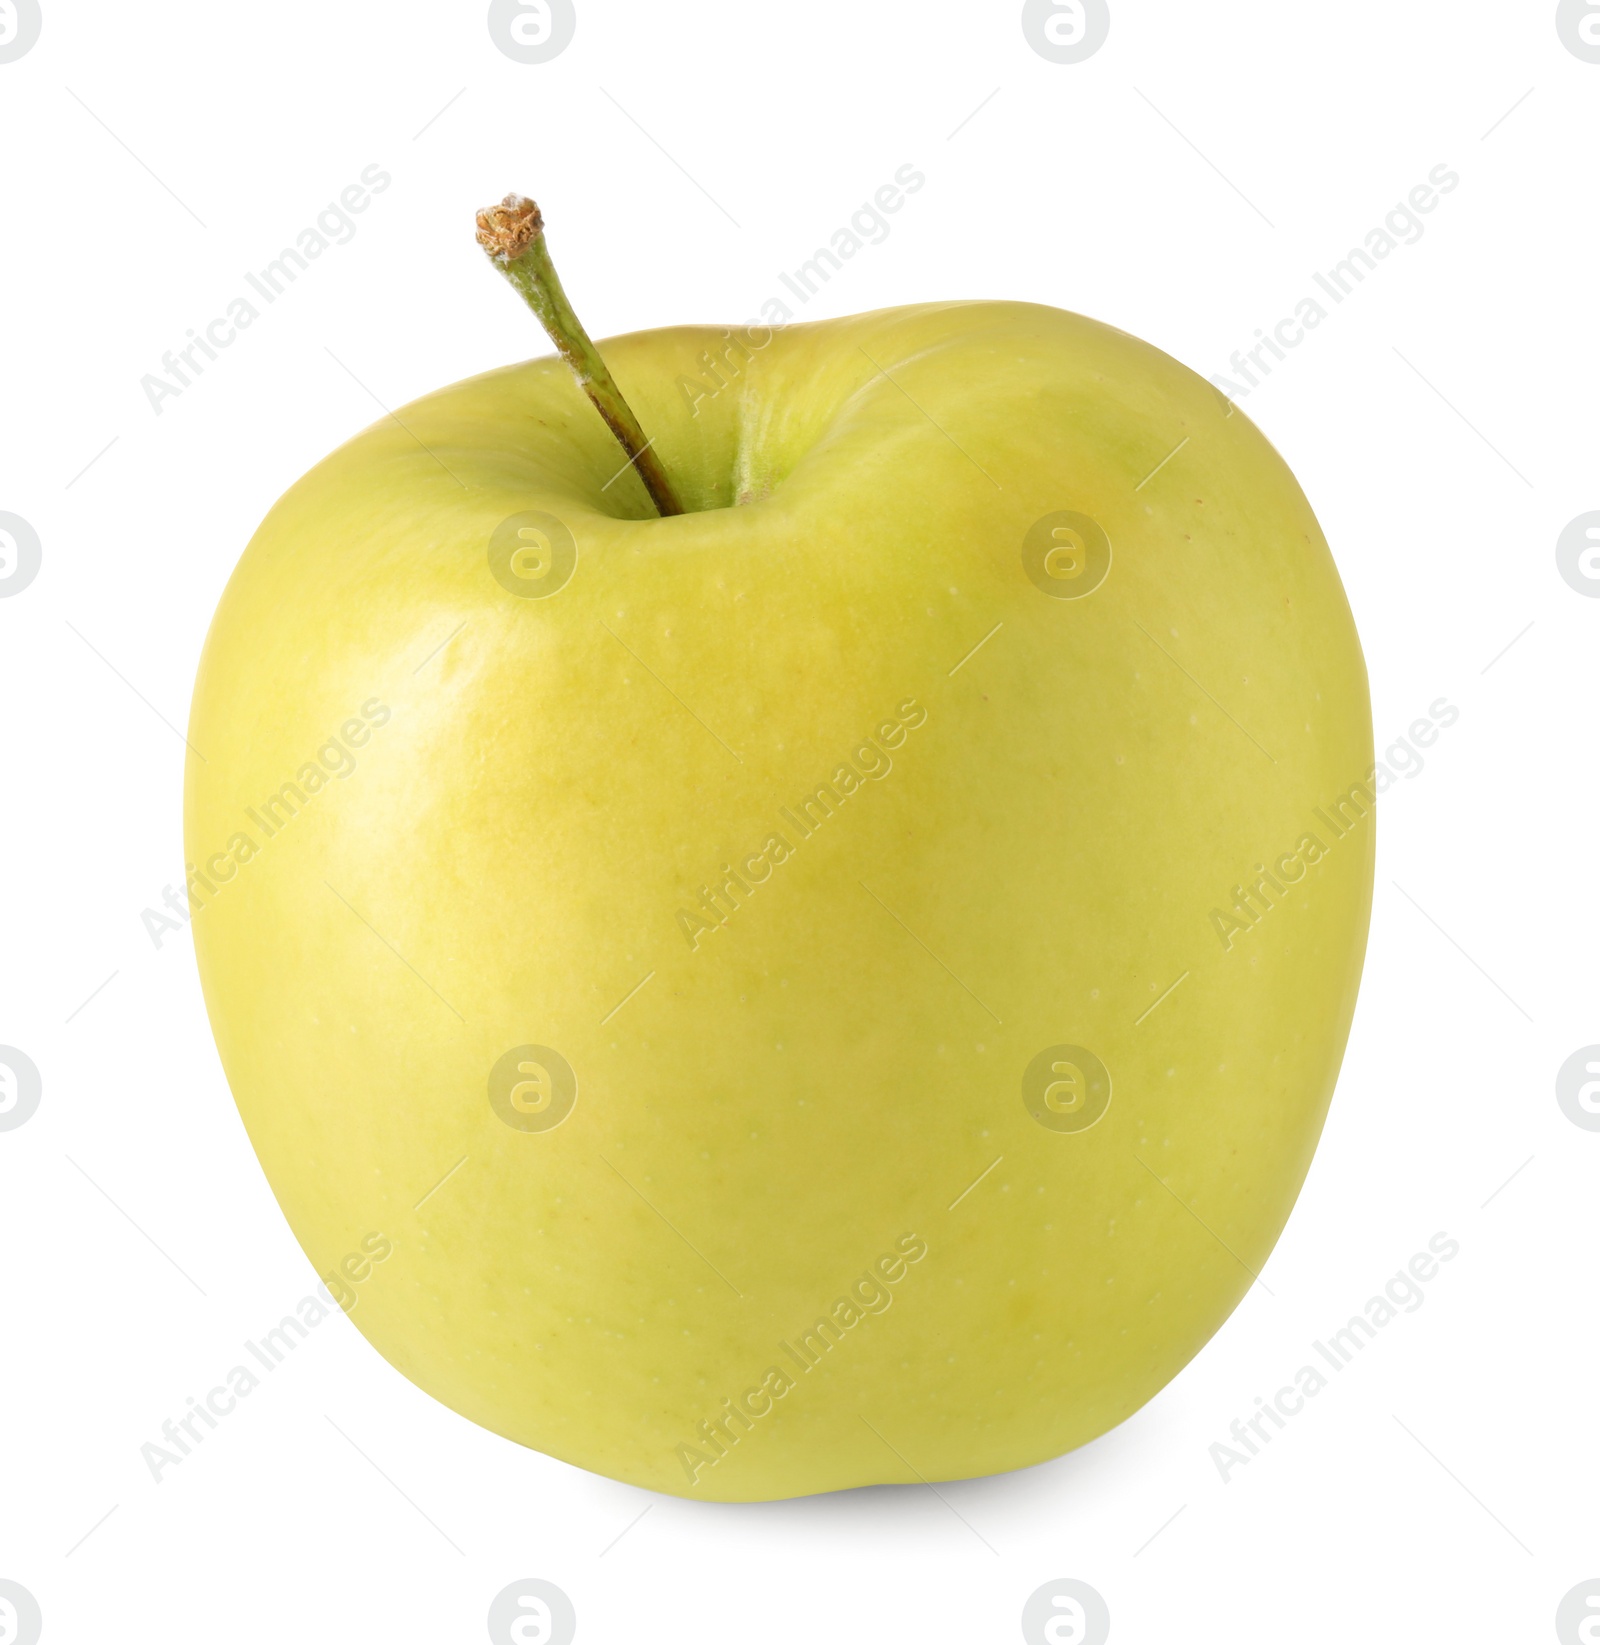 Photo of One ripe green apple isolated on white